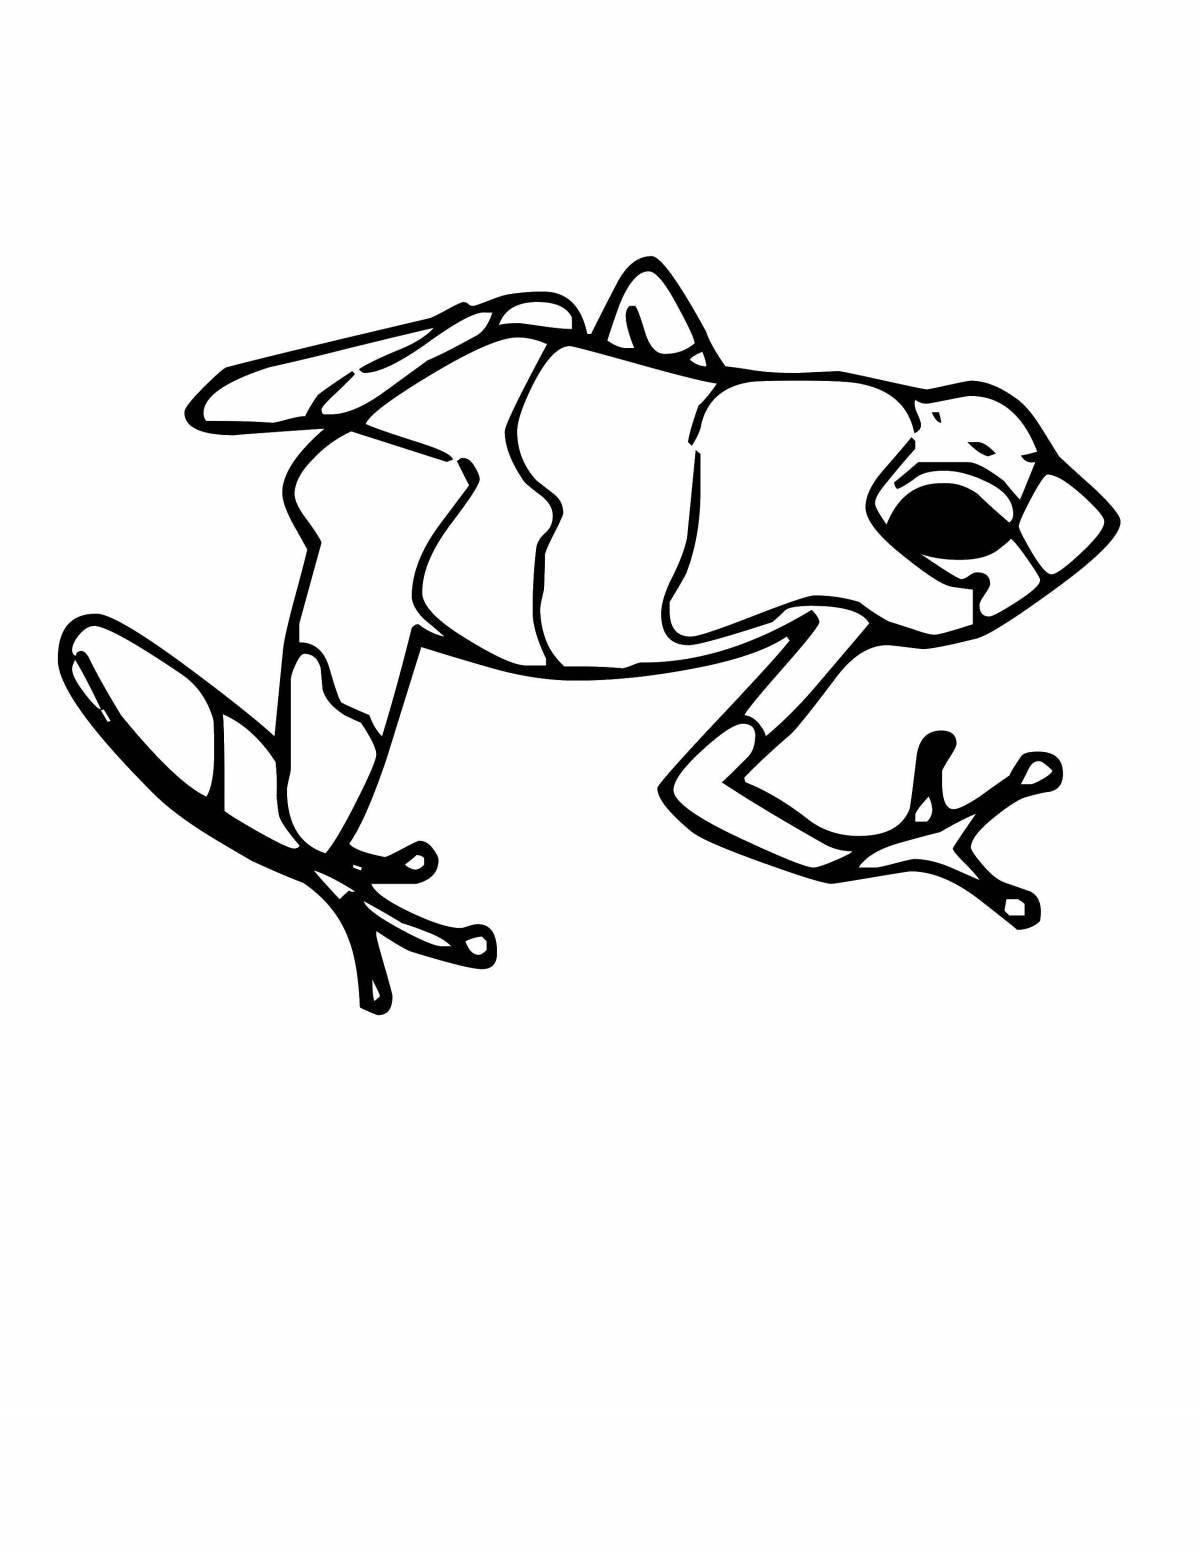 Animated tank coloring page